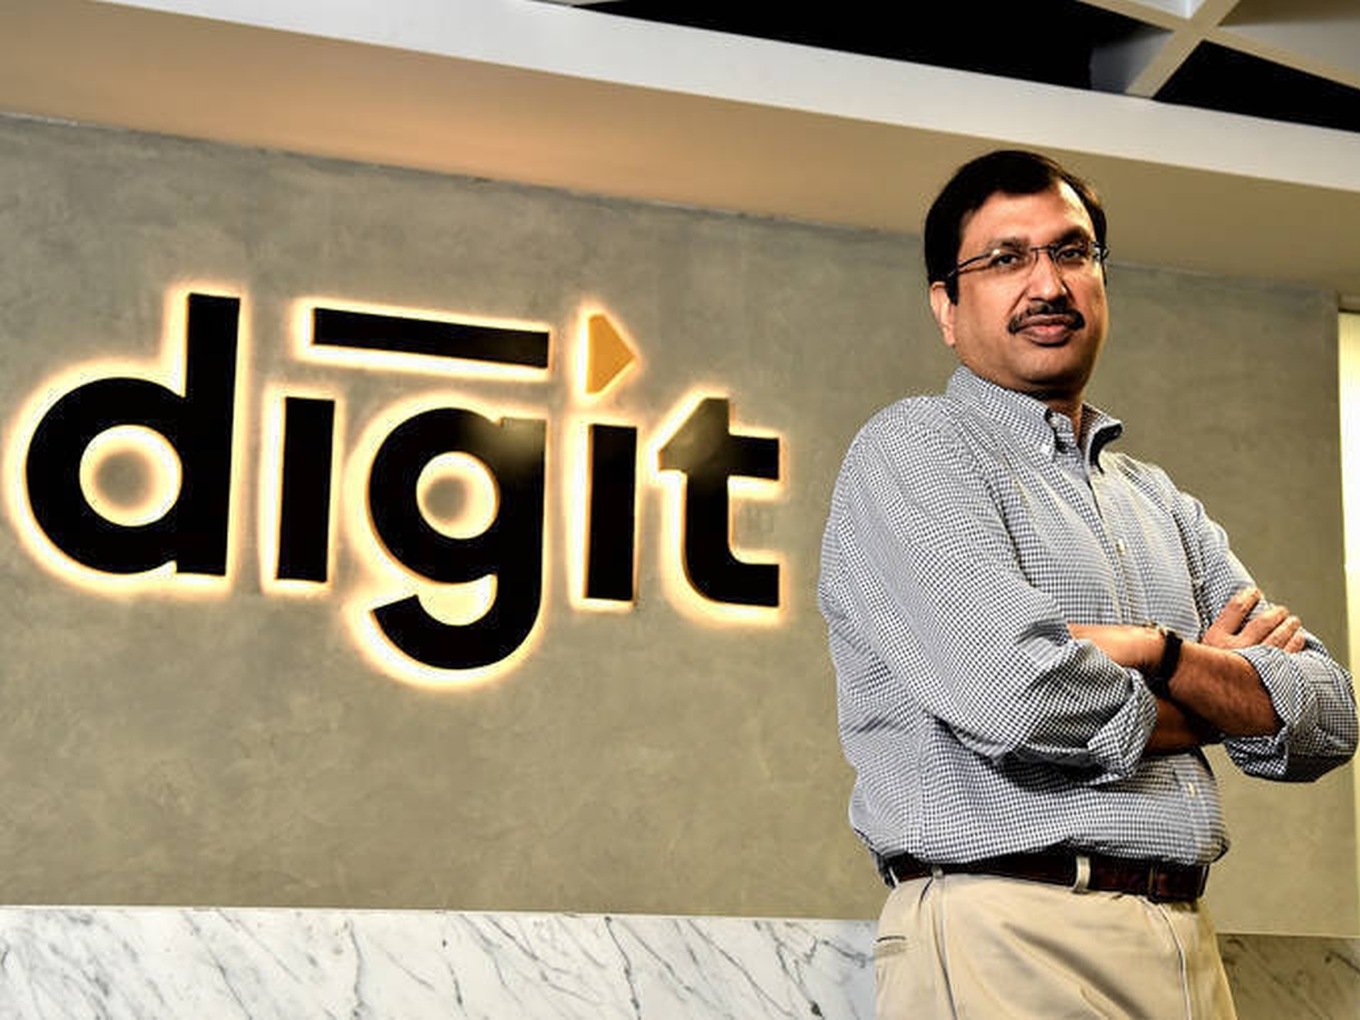 Digit Insurance Valuation Shoots Up To $3.5 Bn After $200 Mn Funding Round